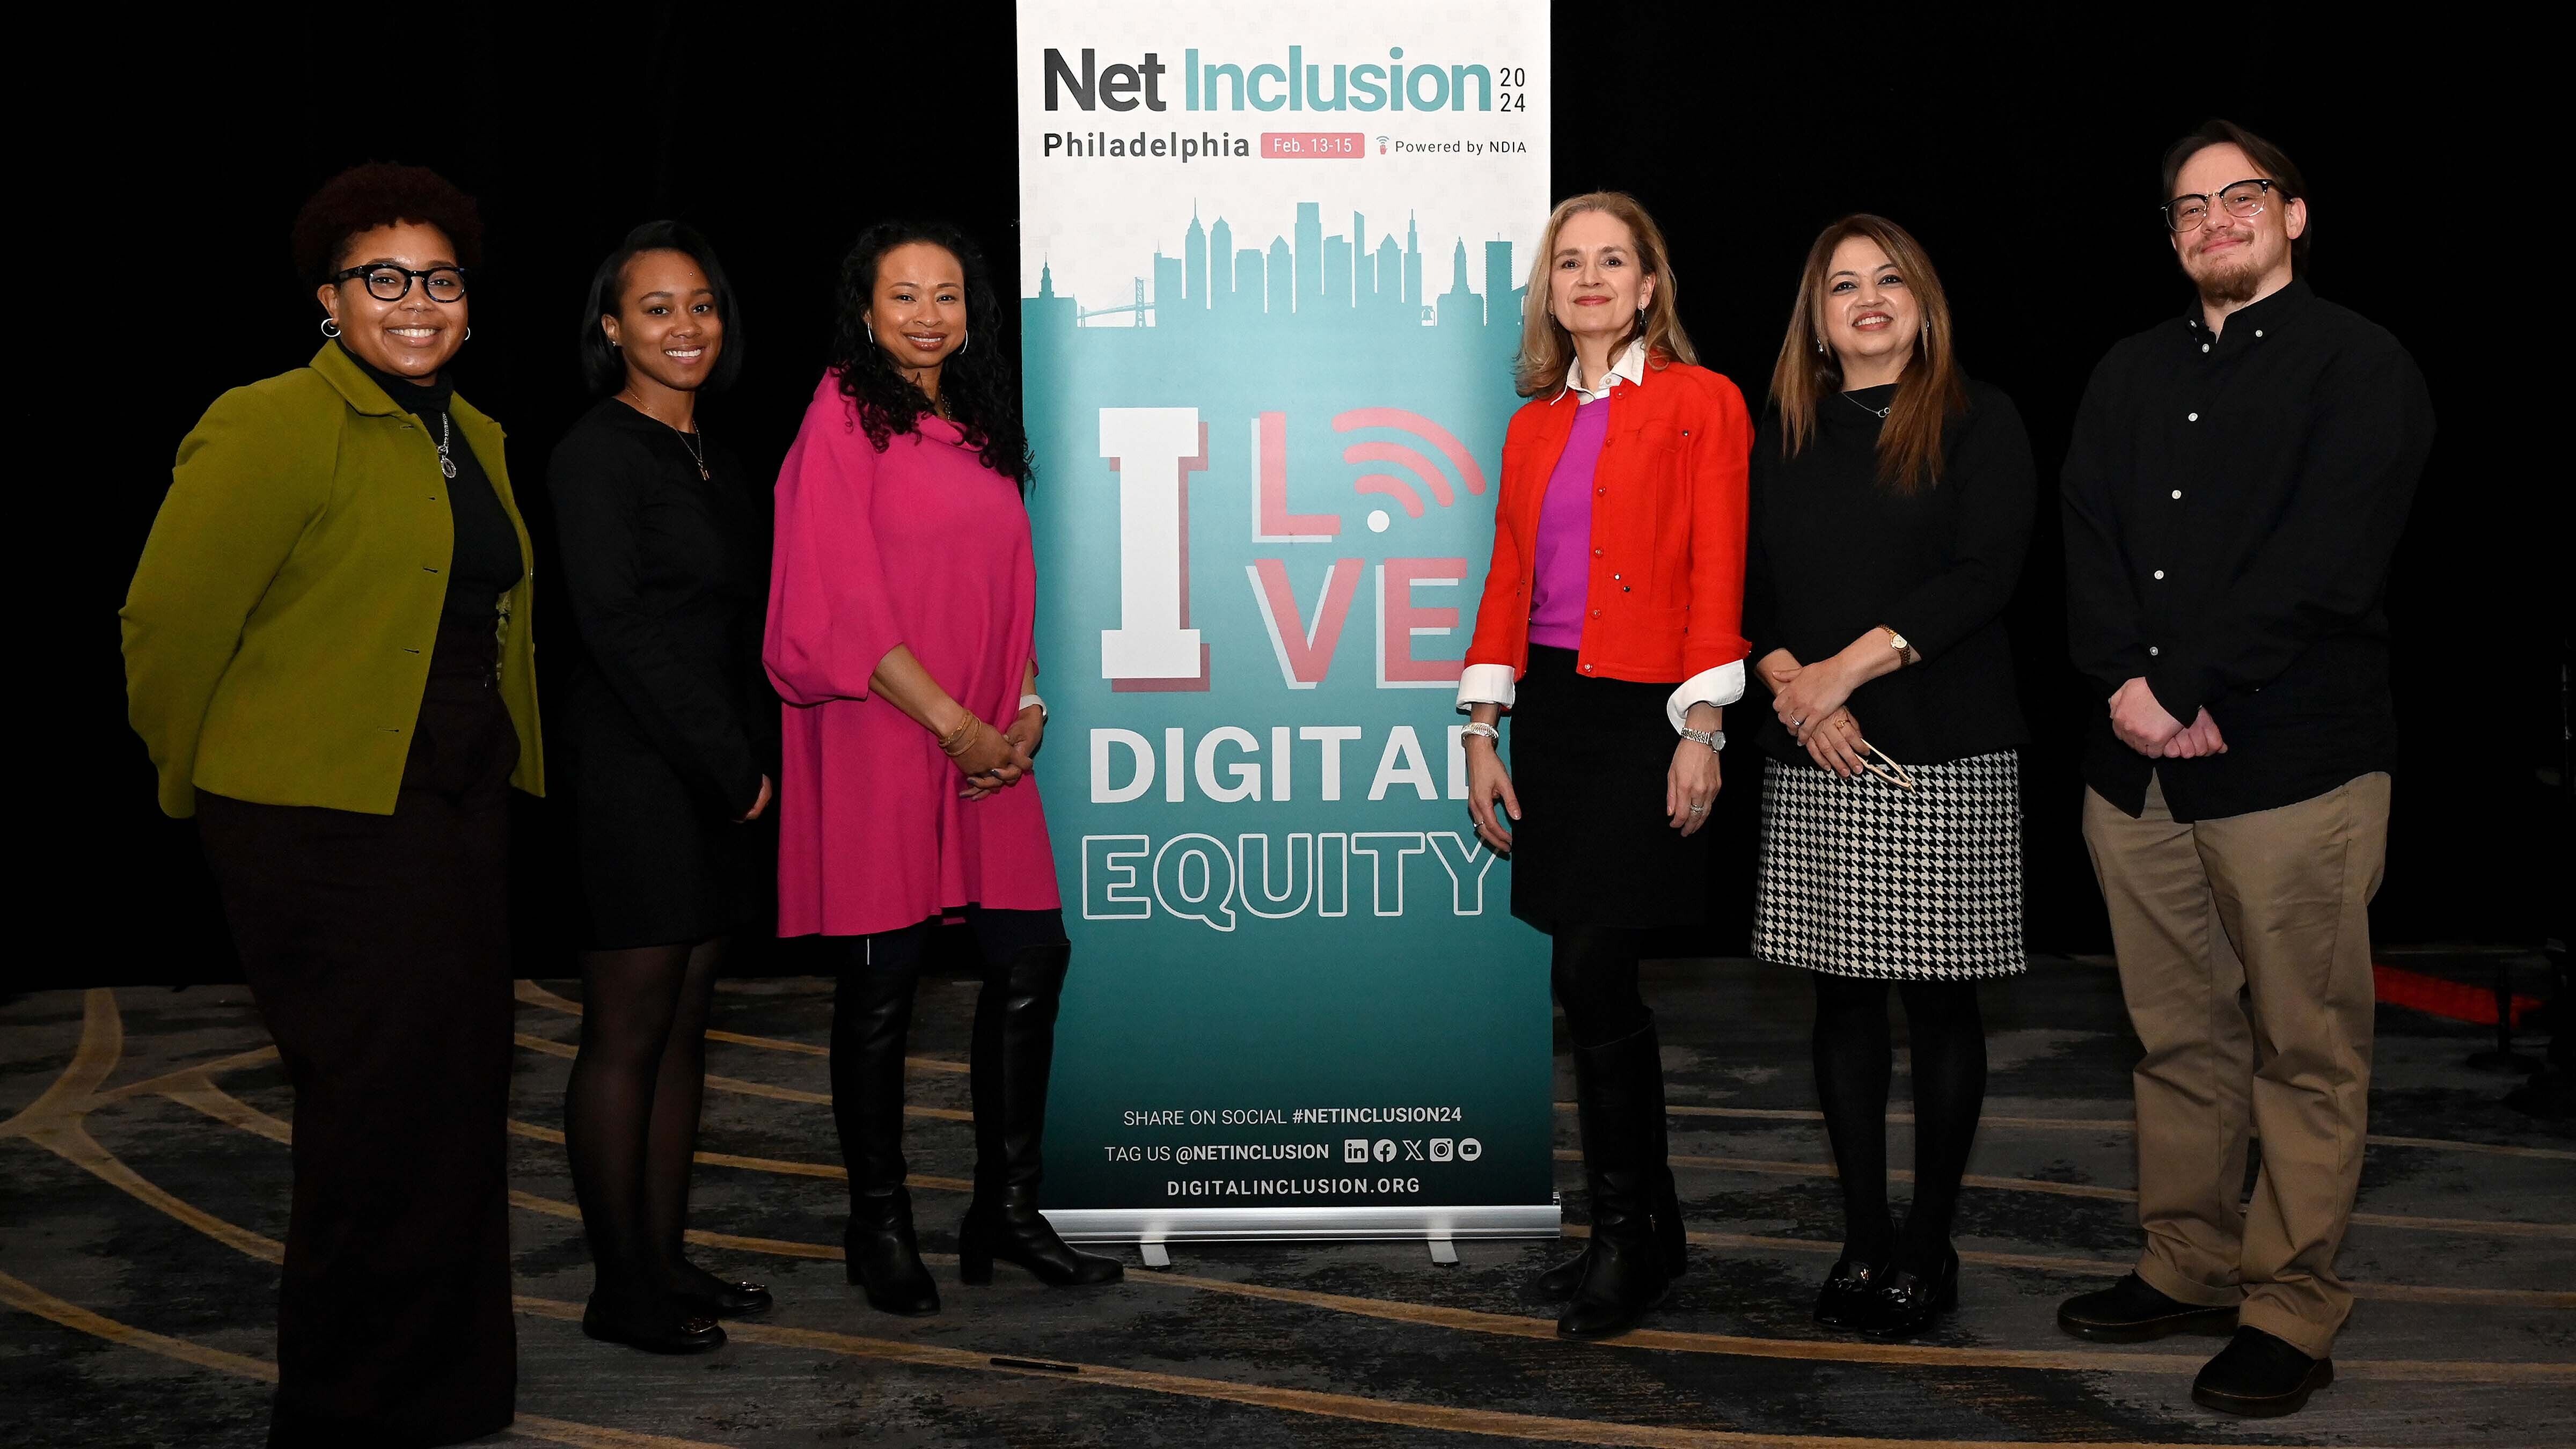 Dalila Wilson-Scott, EVP & Chief Diversity Officer of Comcast Corp., (center left) and five of Comcast’s Project UP partners shared the stage at Net Inclusion.